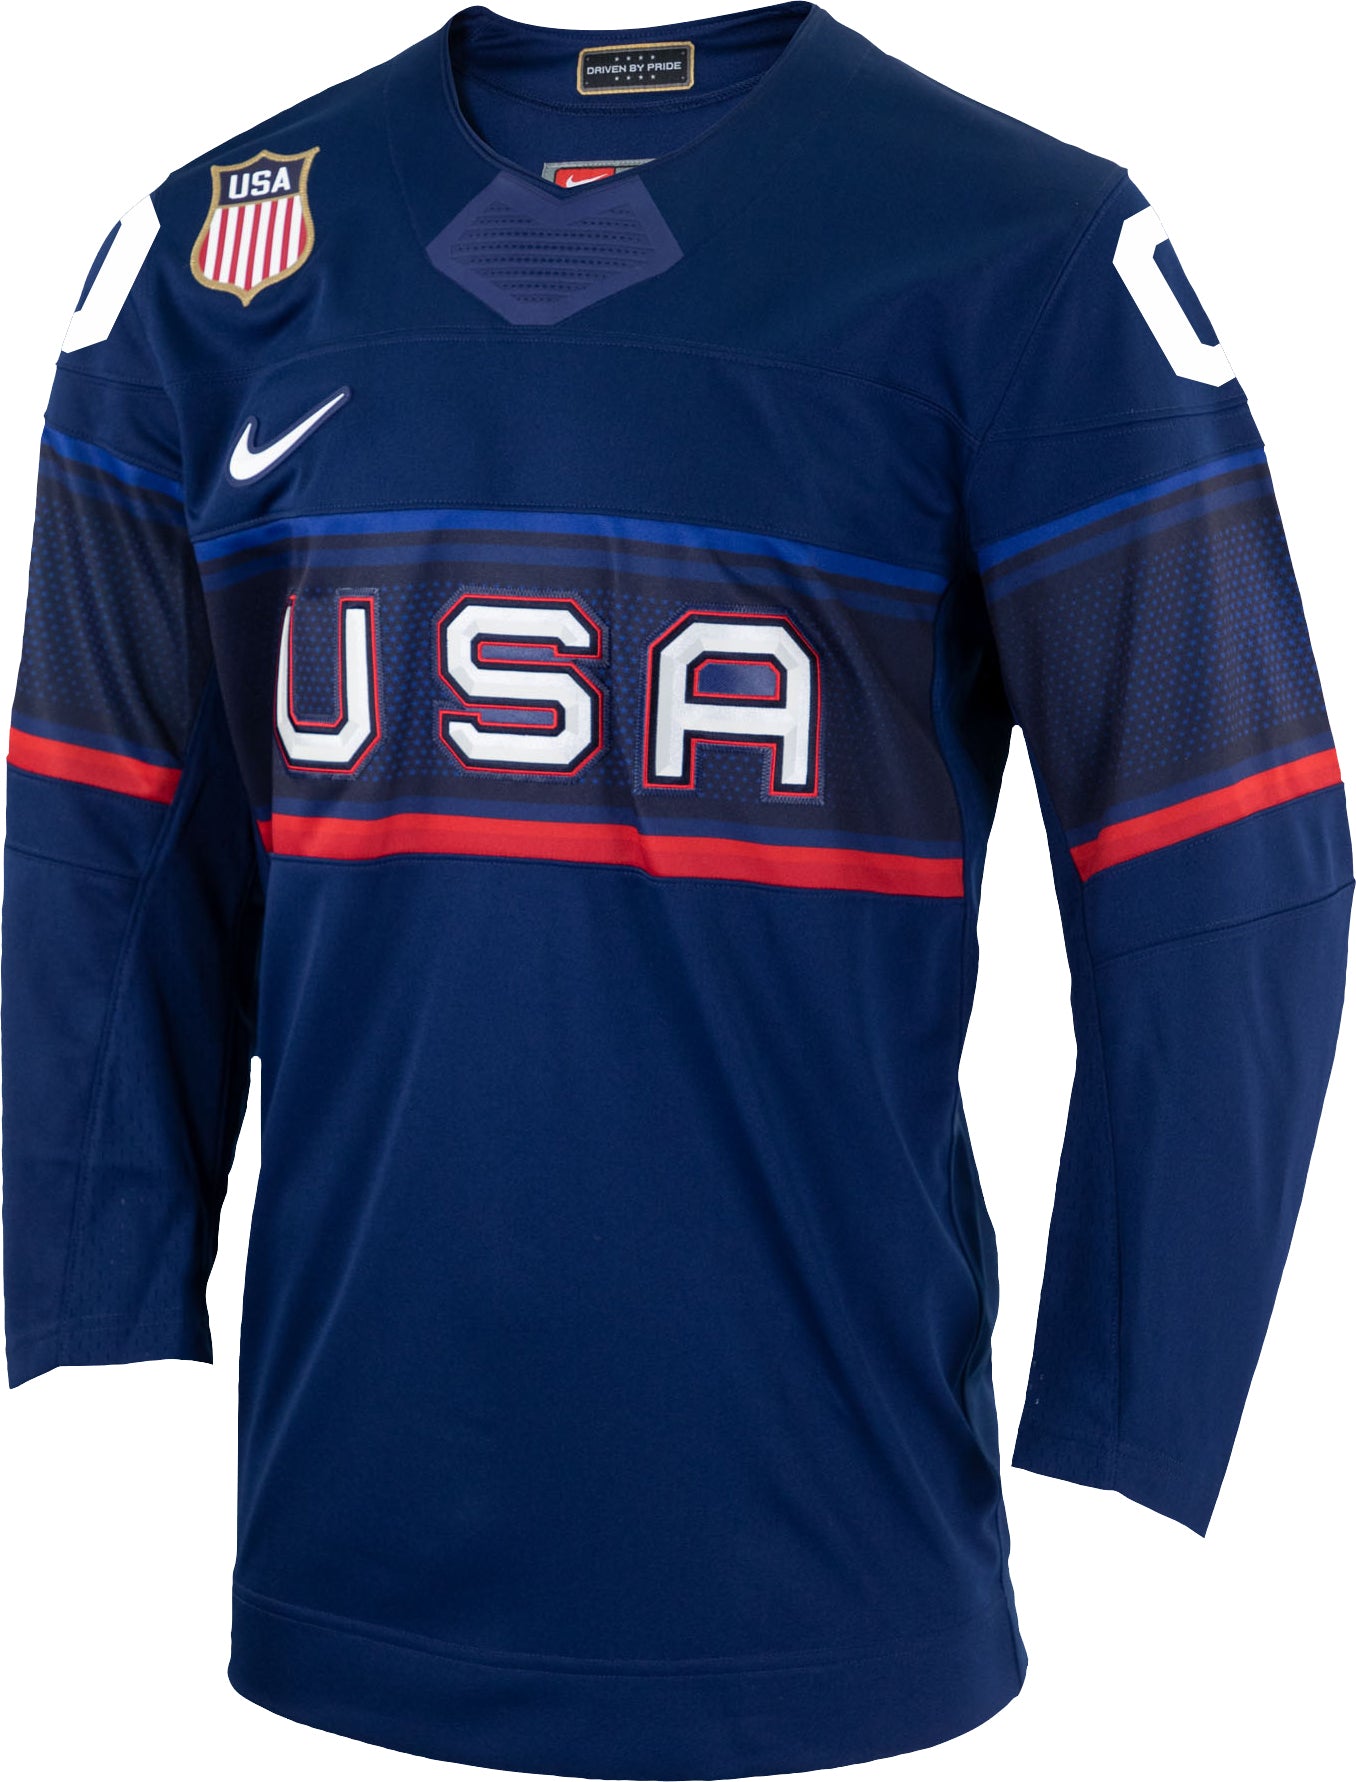 Personalized Away Long Sleeves Jersey